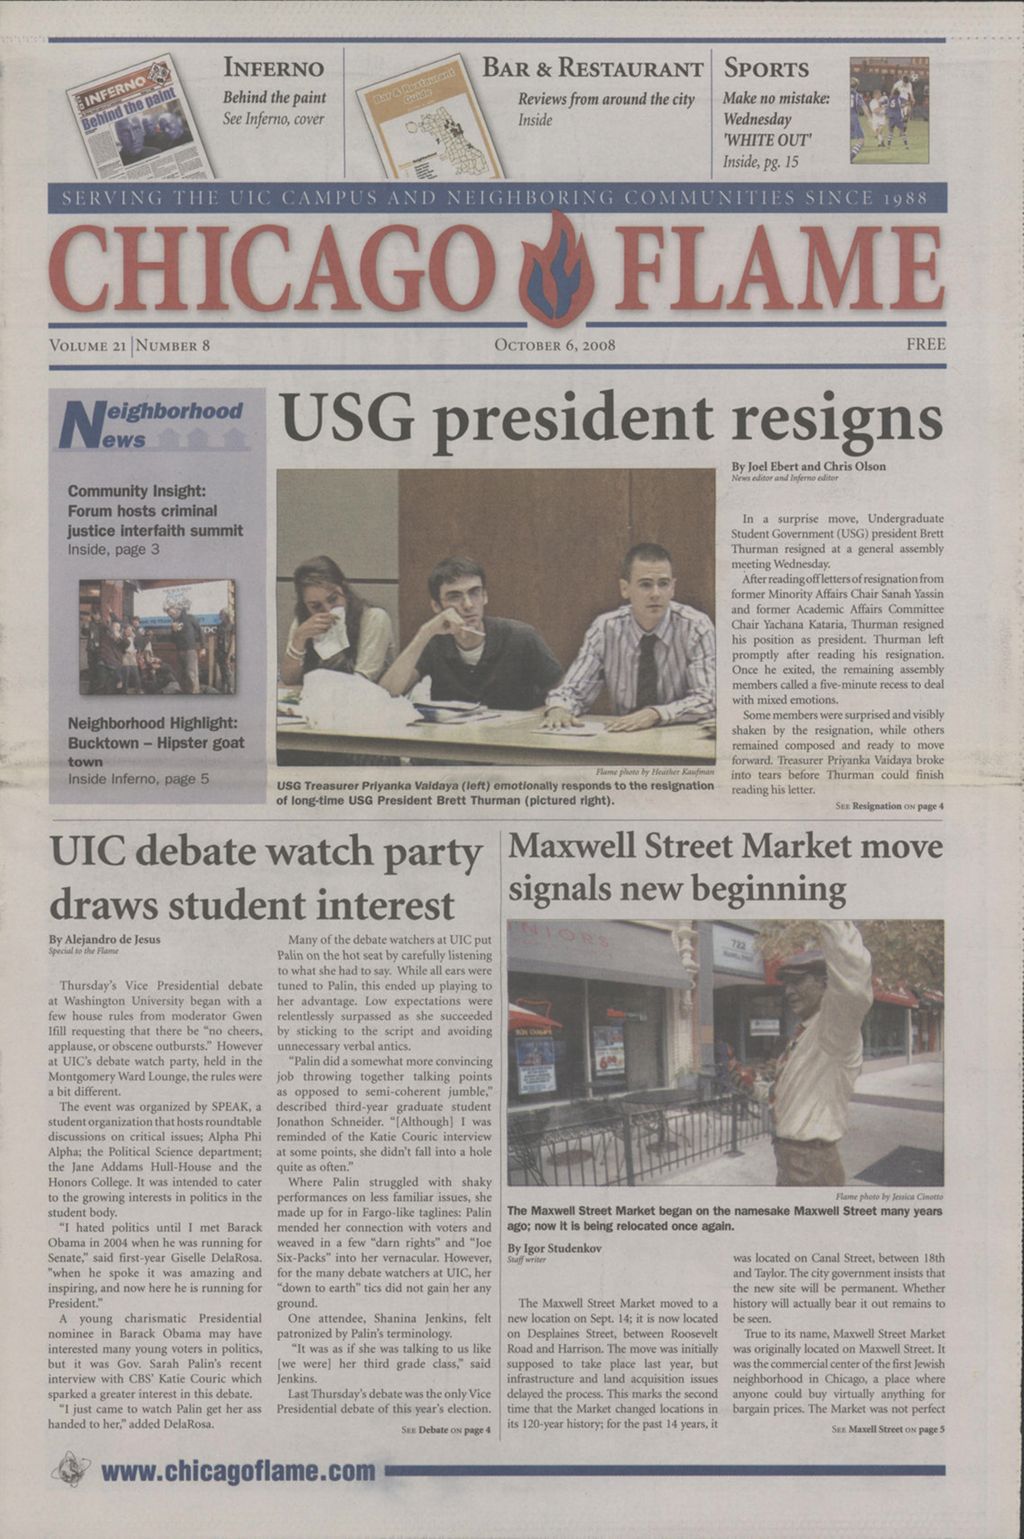 Miniature of Chicago Flame (October 6, 2008)